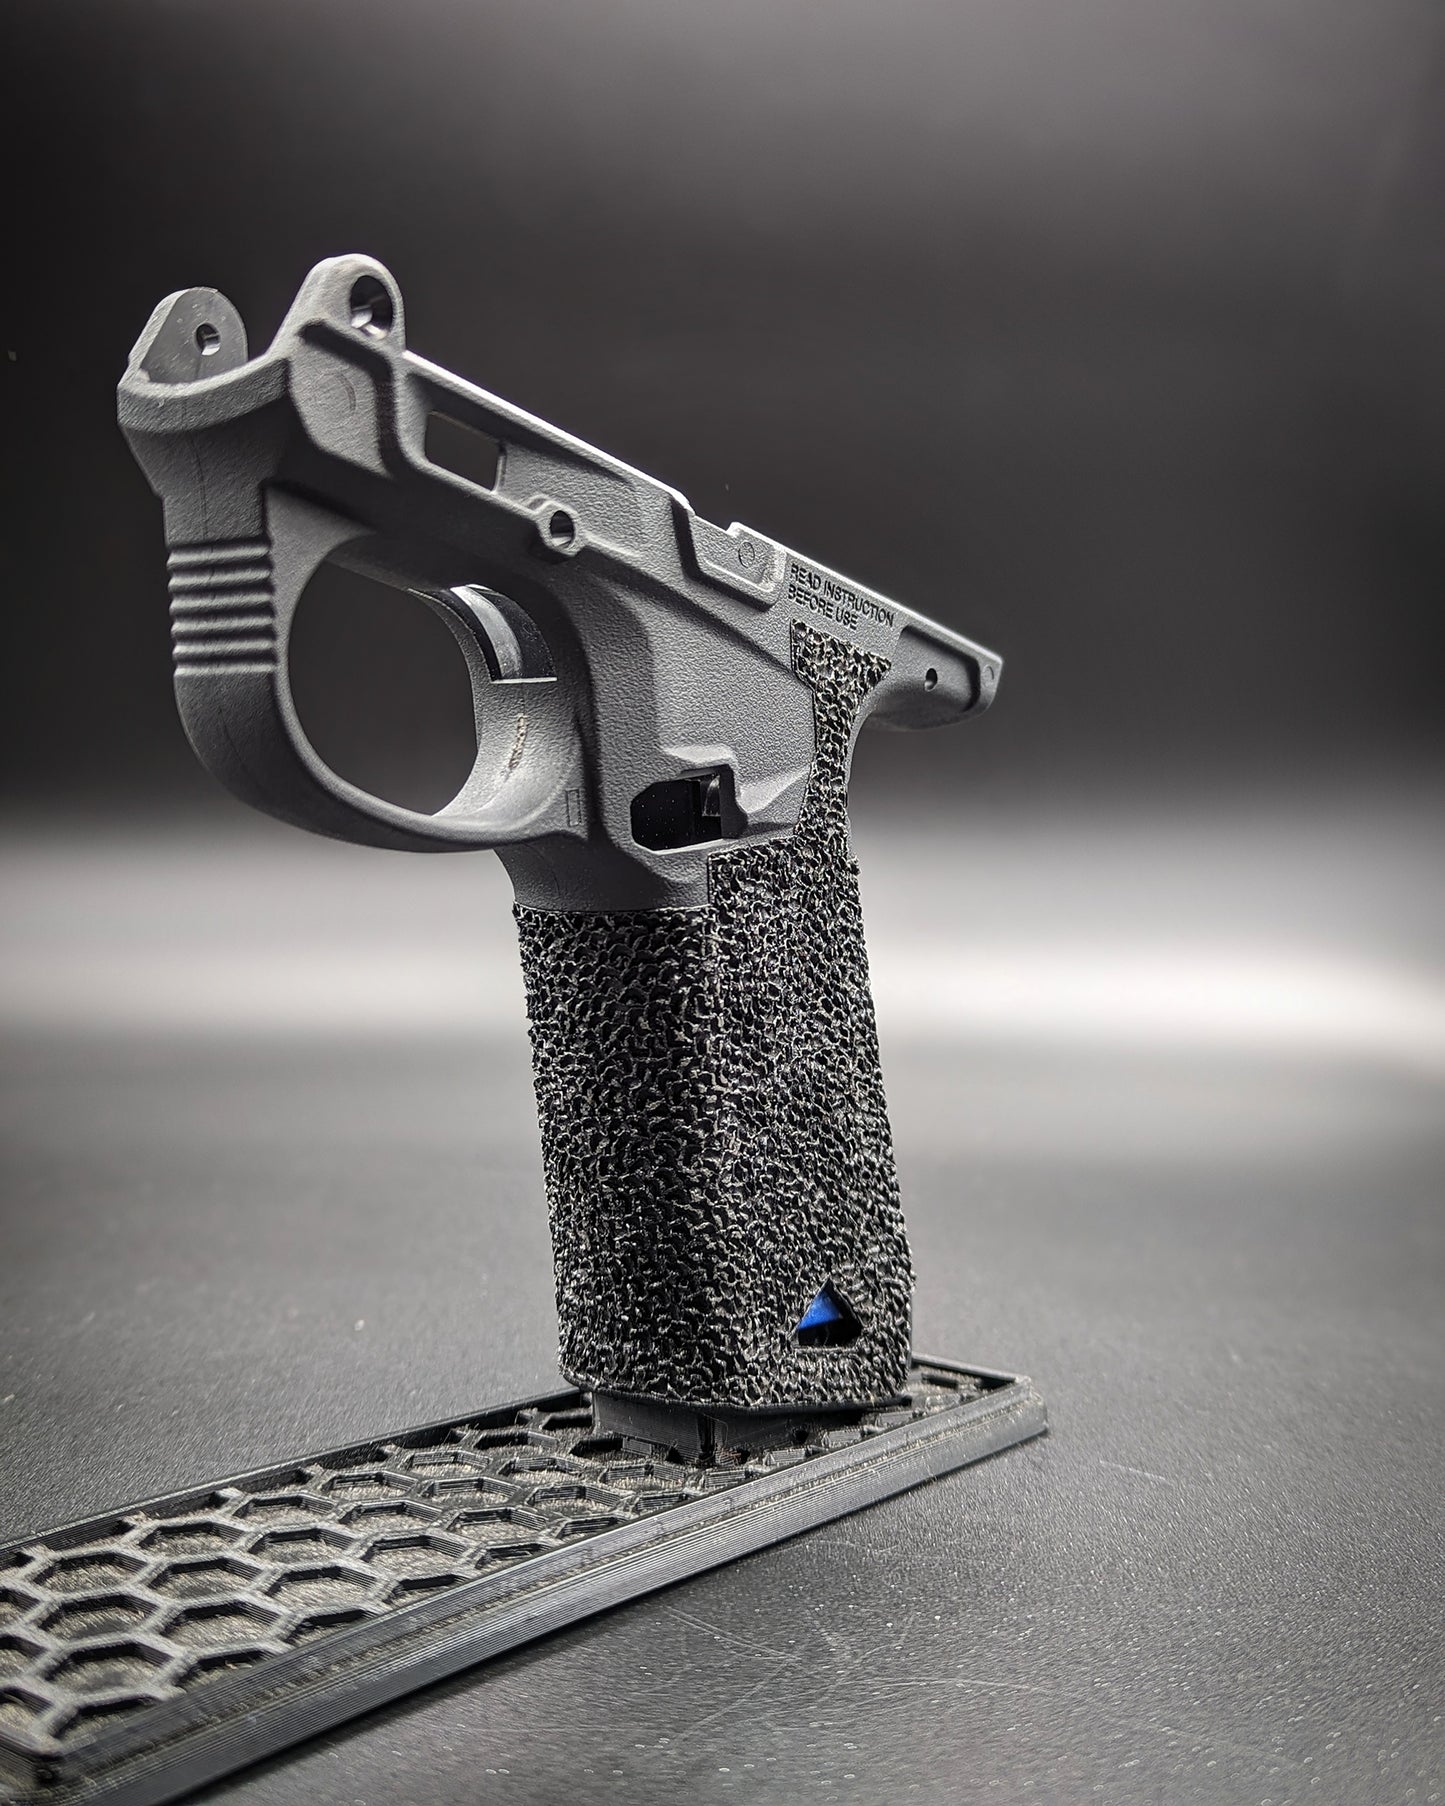 Action Army OEM AAP-01 Grip Stippled - Vector